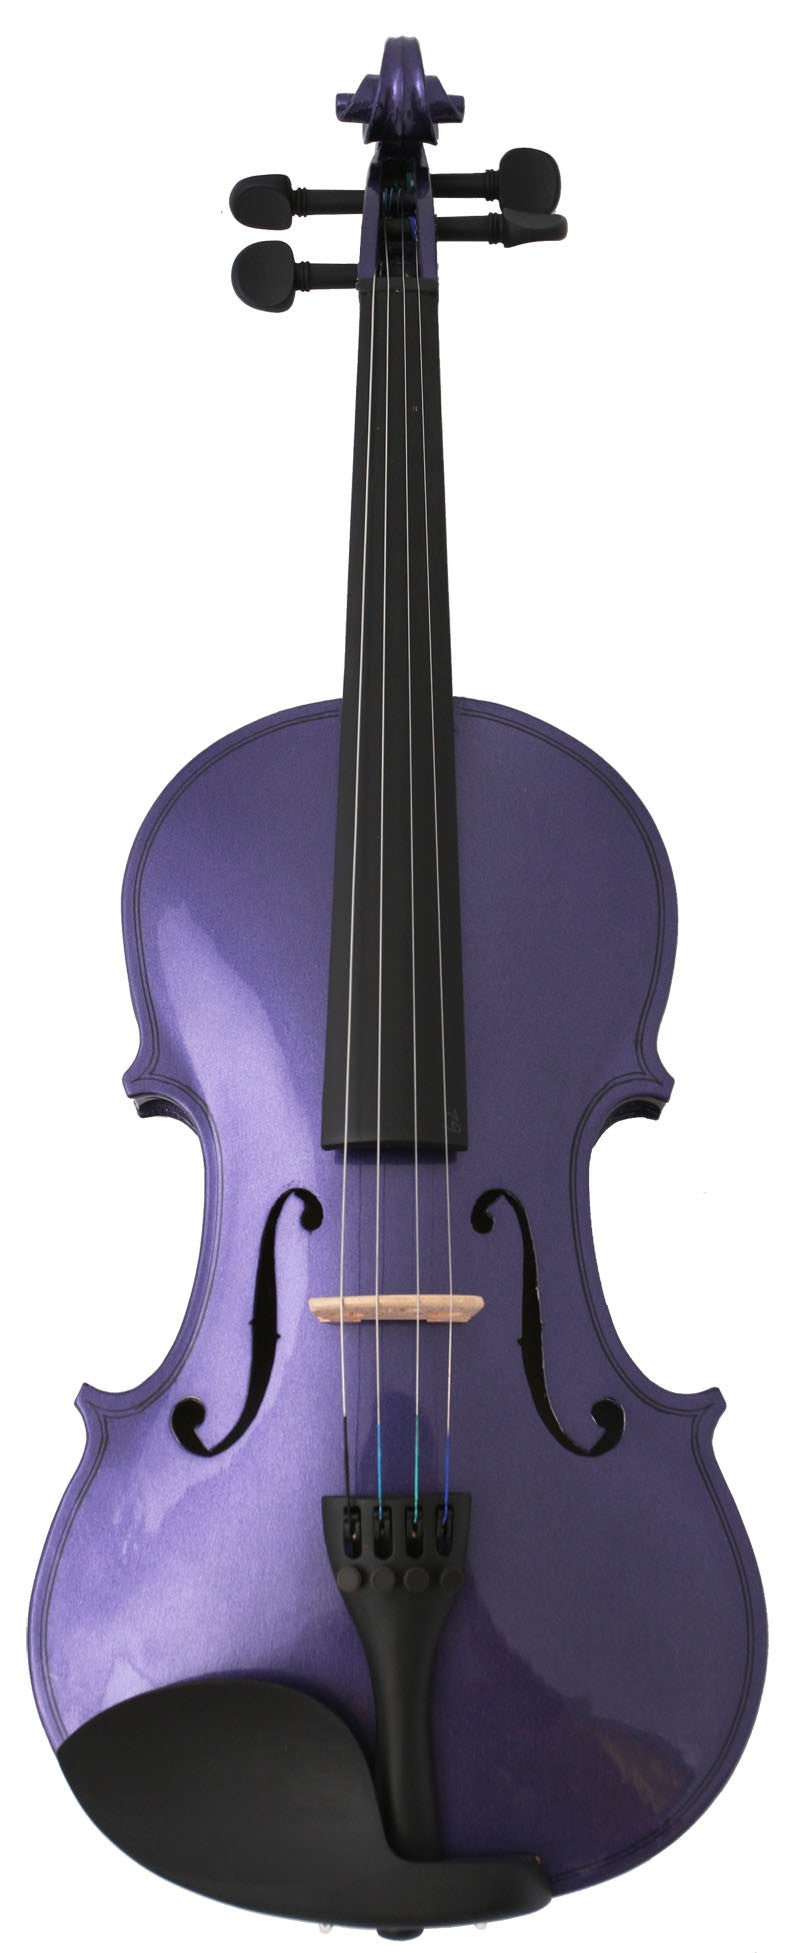 Crescent Direct Vl-prm1/4 1/4 Purple Maplewood Acoustic Violin With Case, Rosin, And Bow